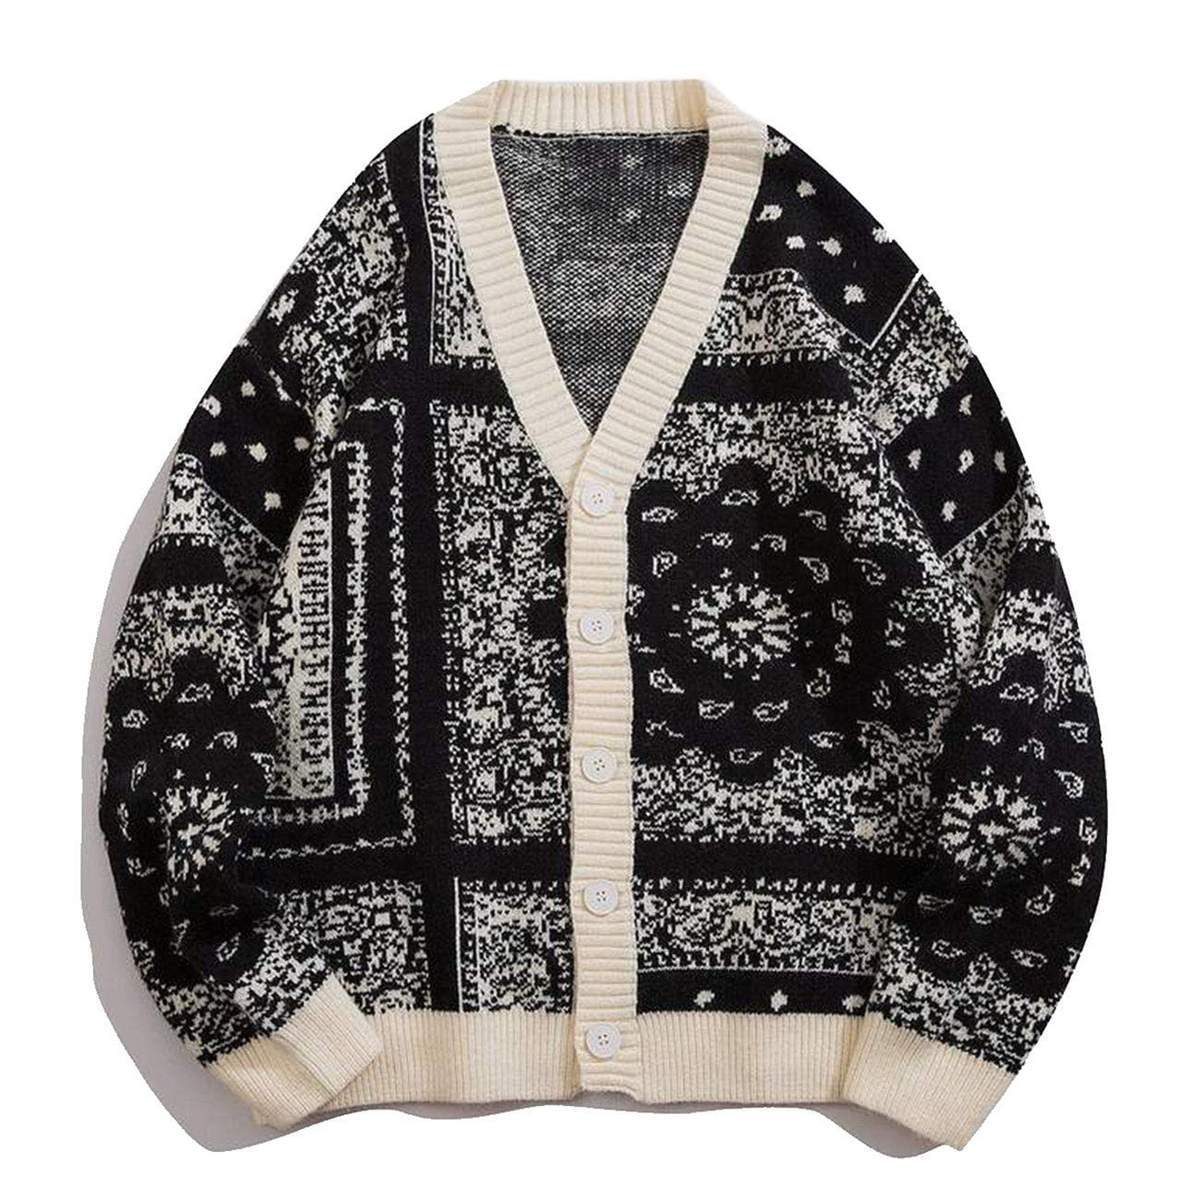 WLS Embroidered Vintage Pattern Buttons Closure Cardigan Sweater